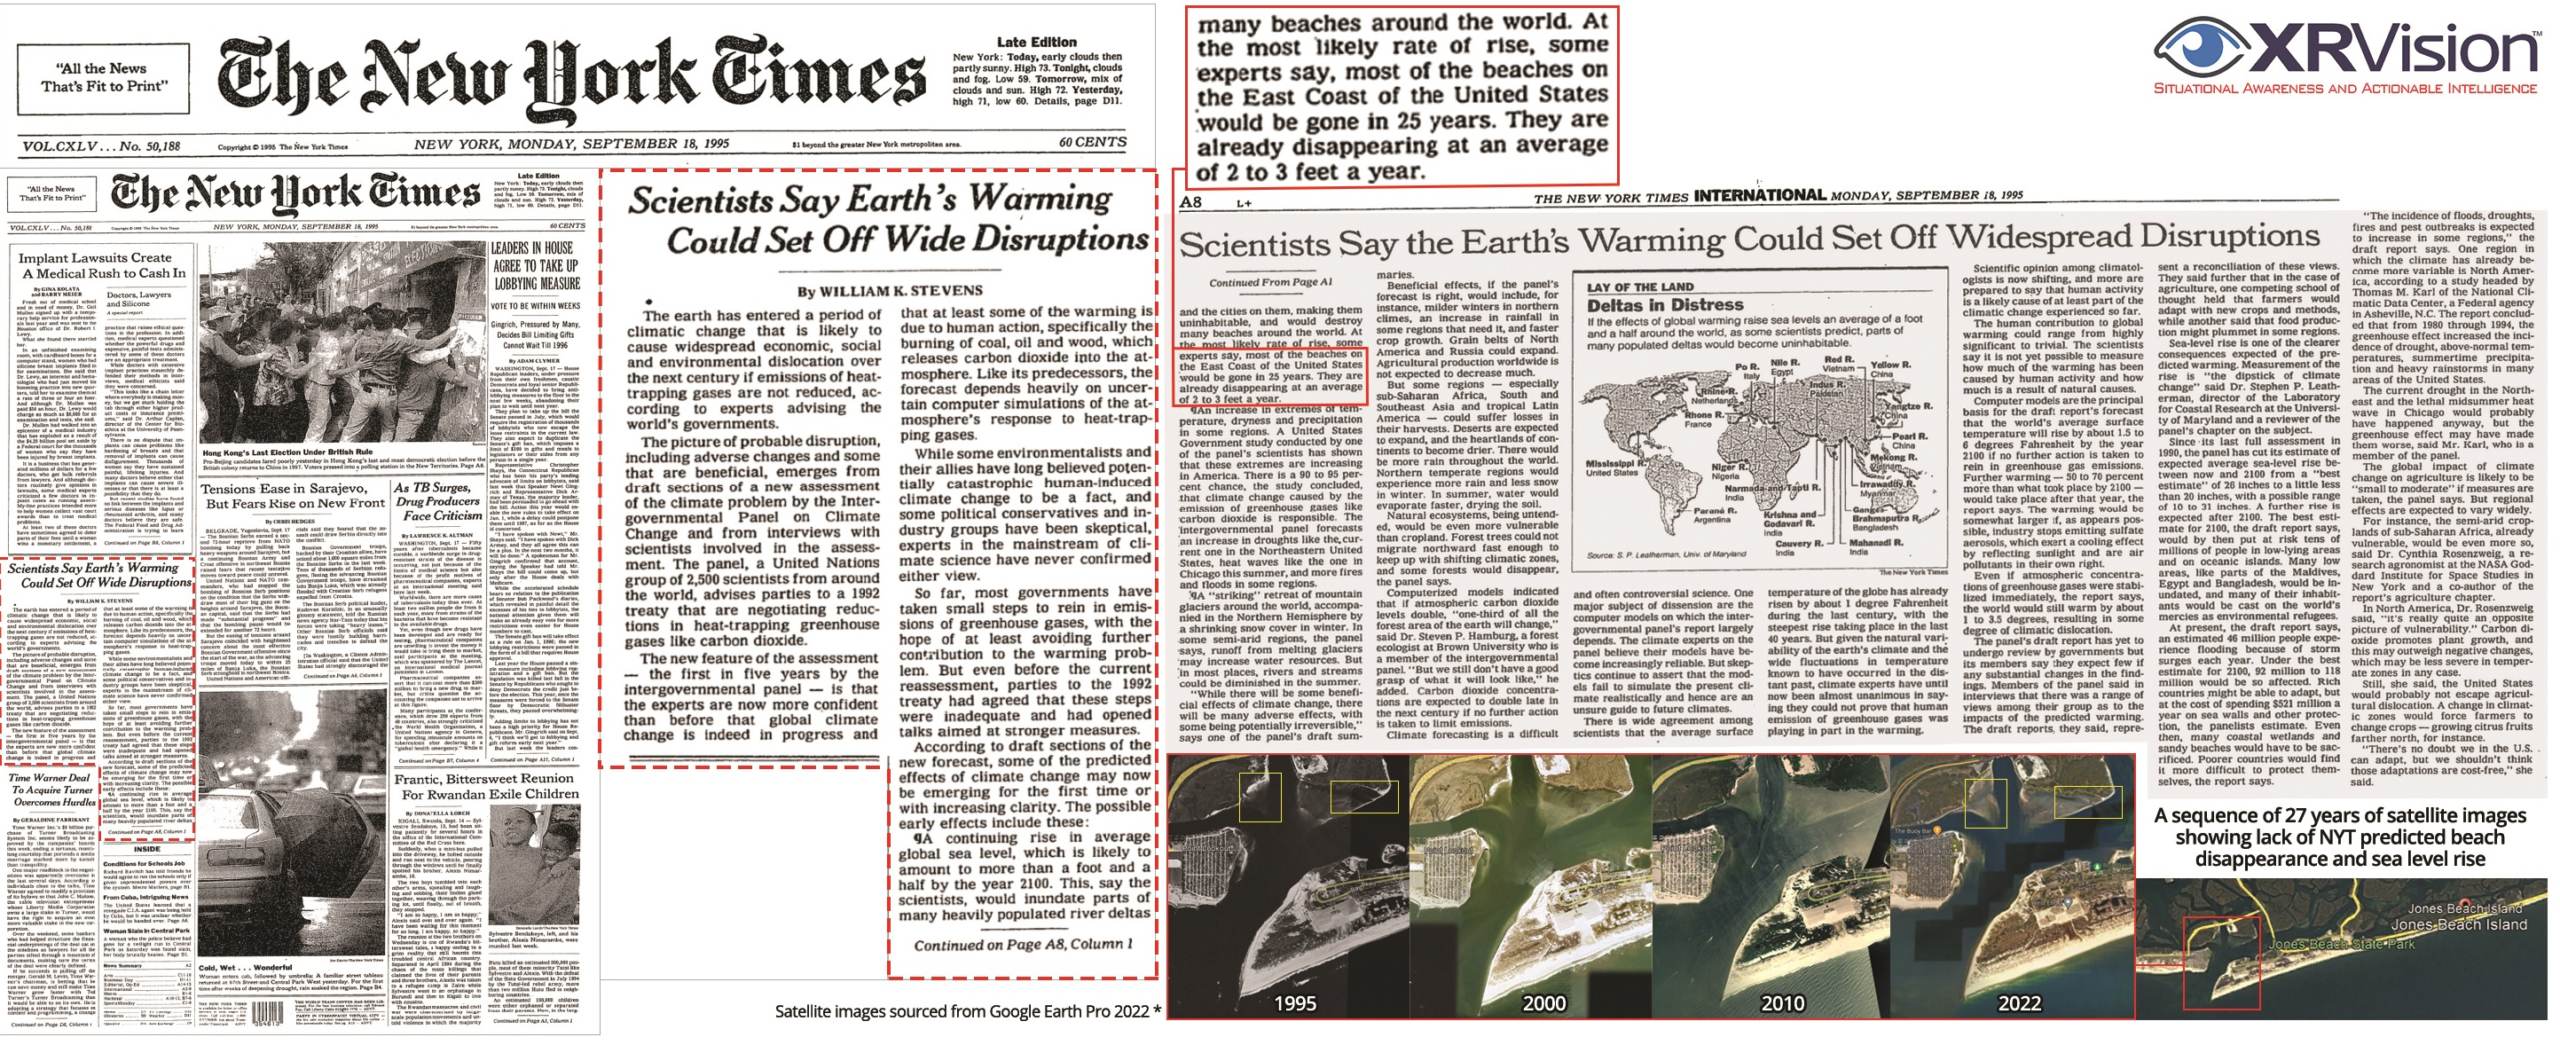 NYT-1995-Beaches-are-gone-in-25-Years4-scaled.jpg